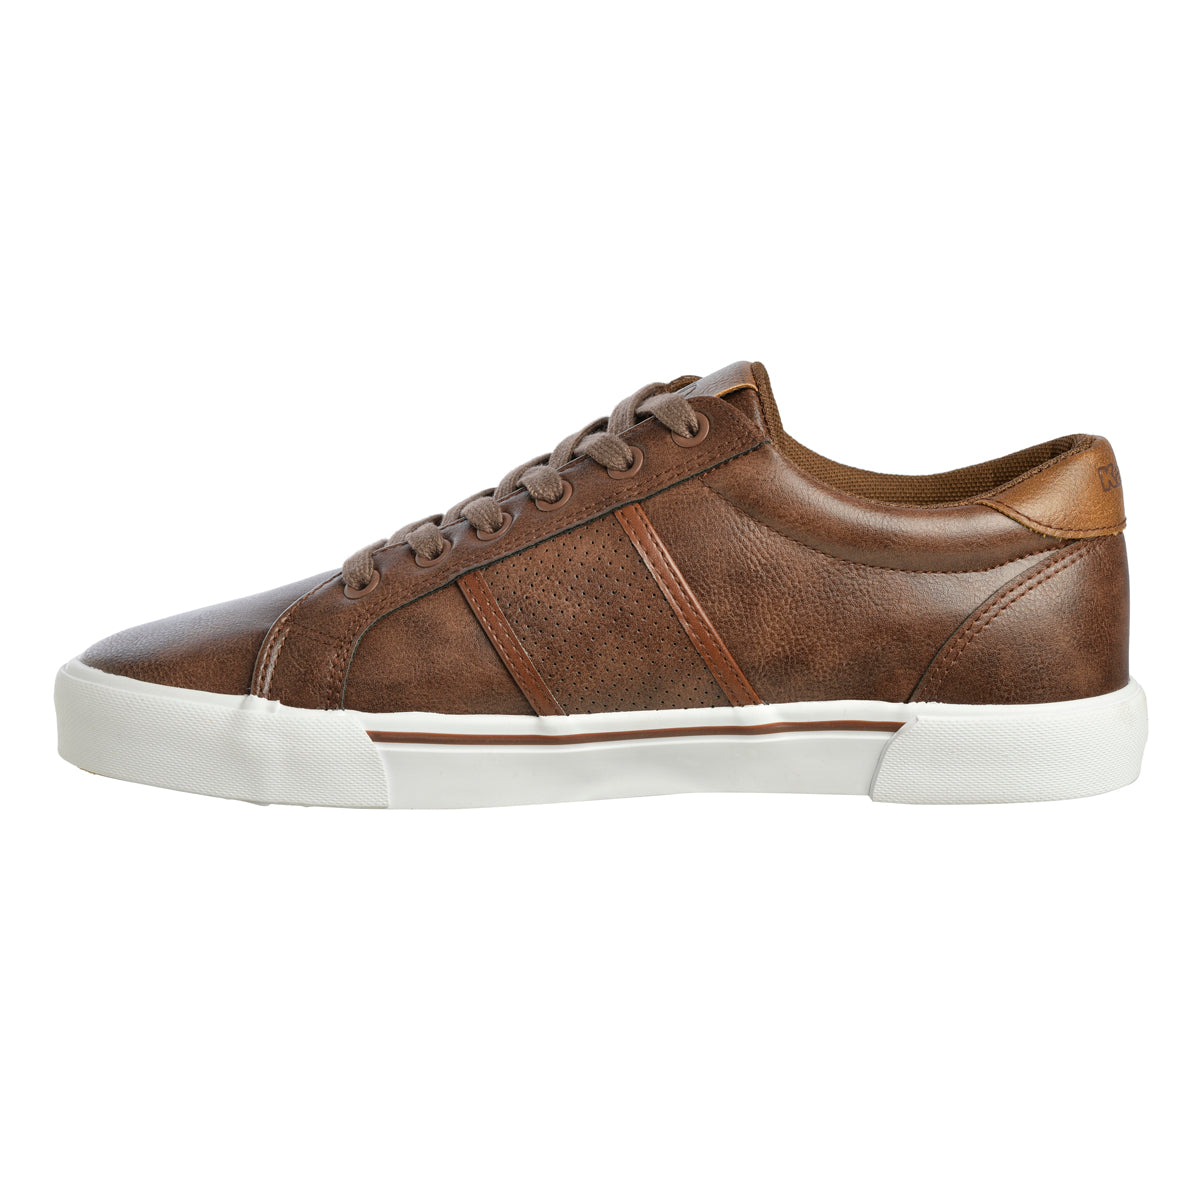 Chaussures lifestyle Chiva Marron homme - image 2